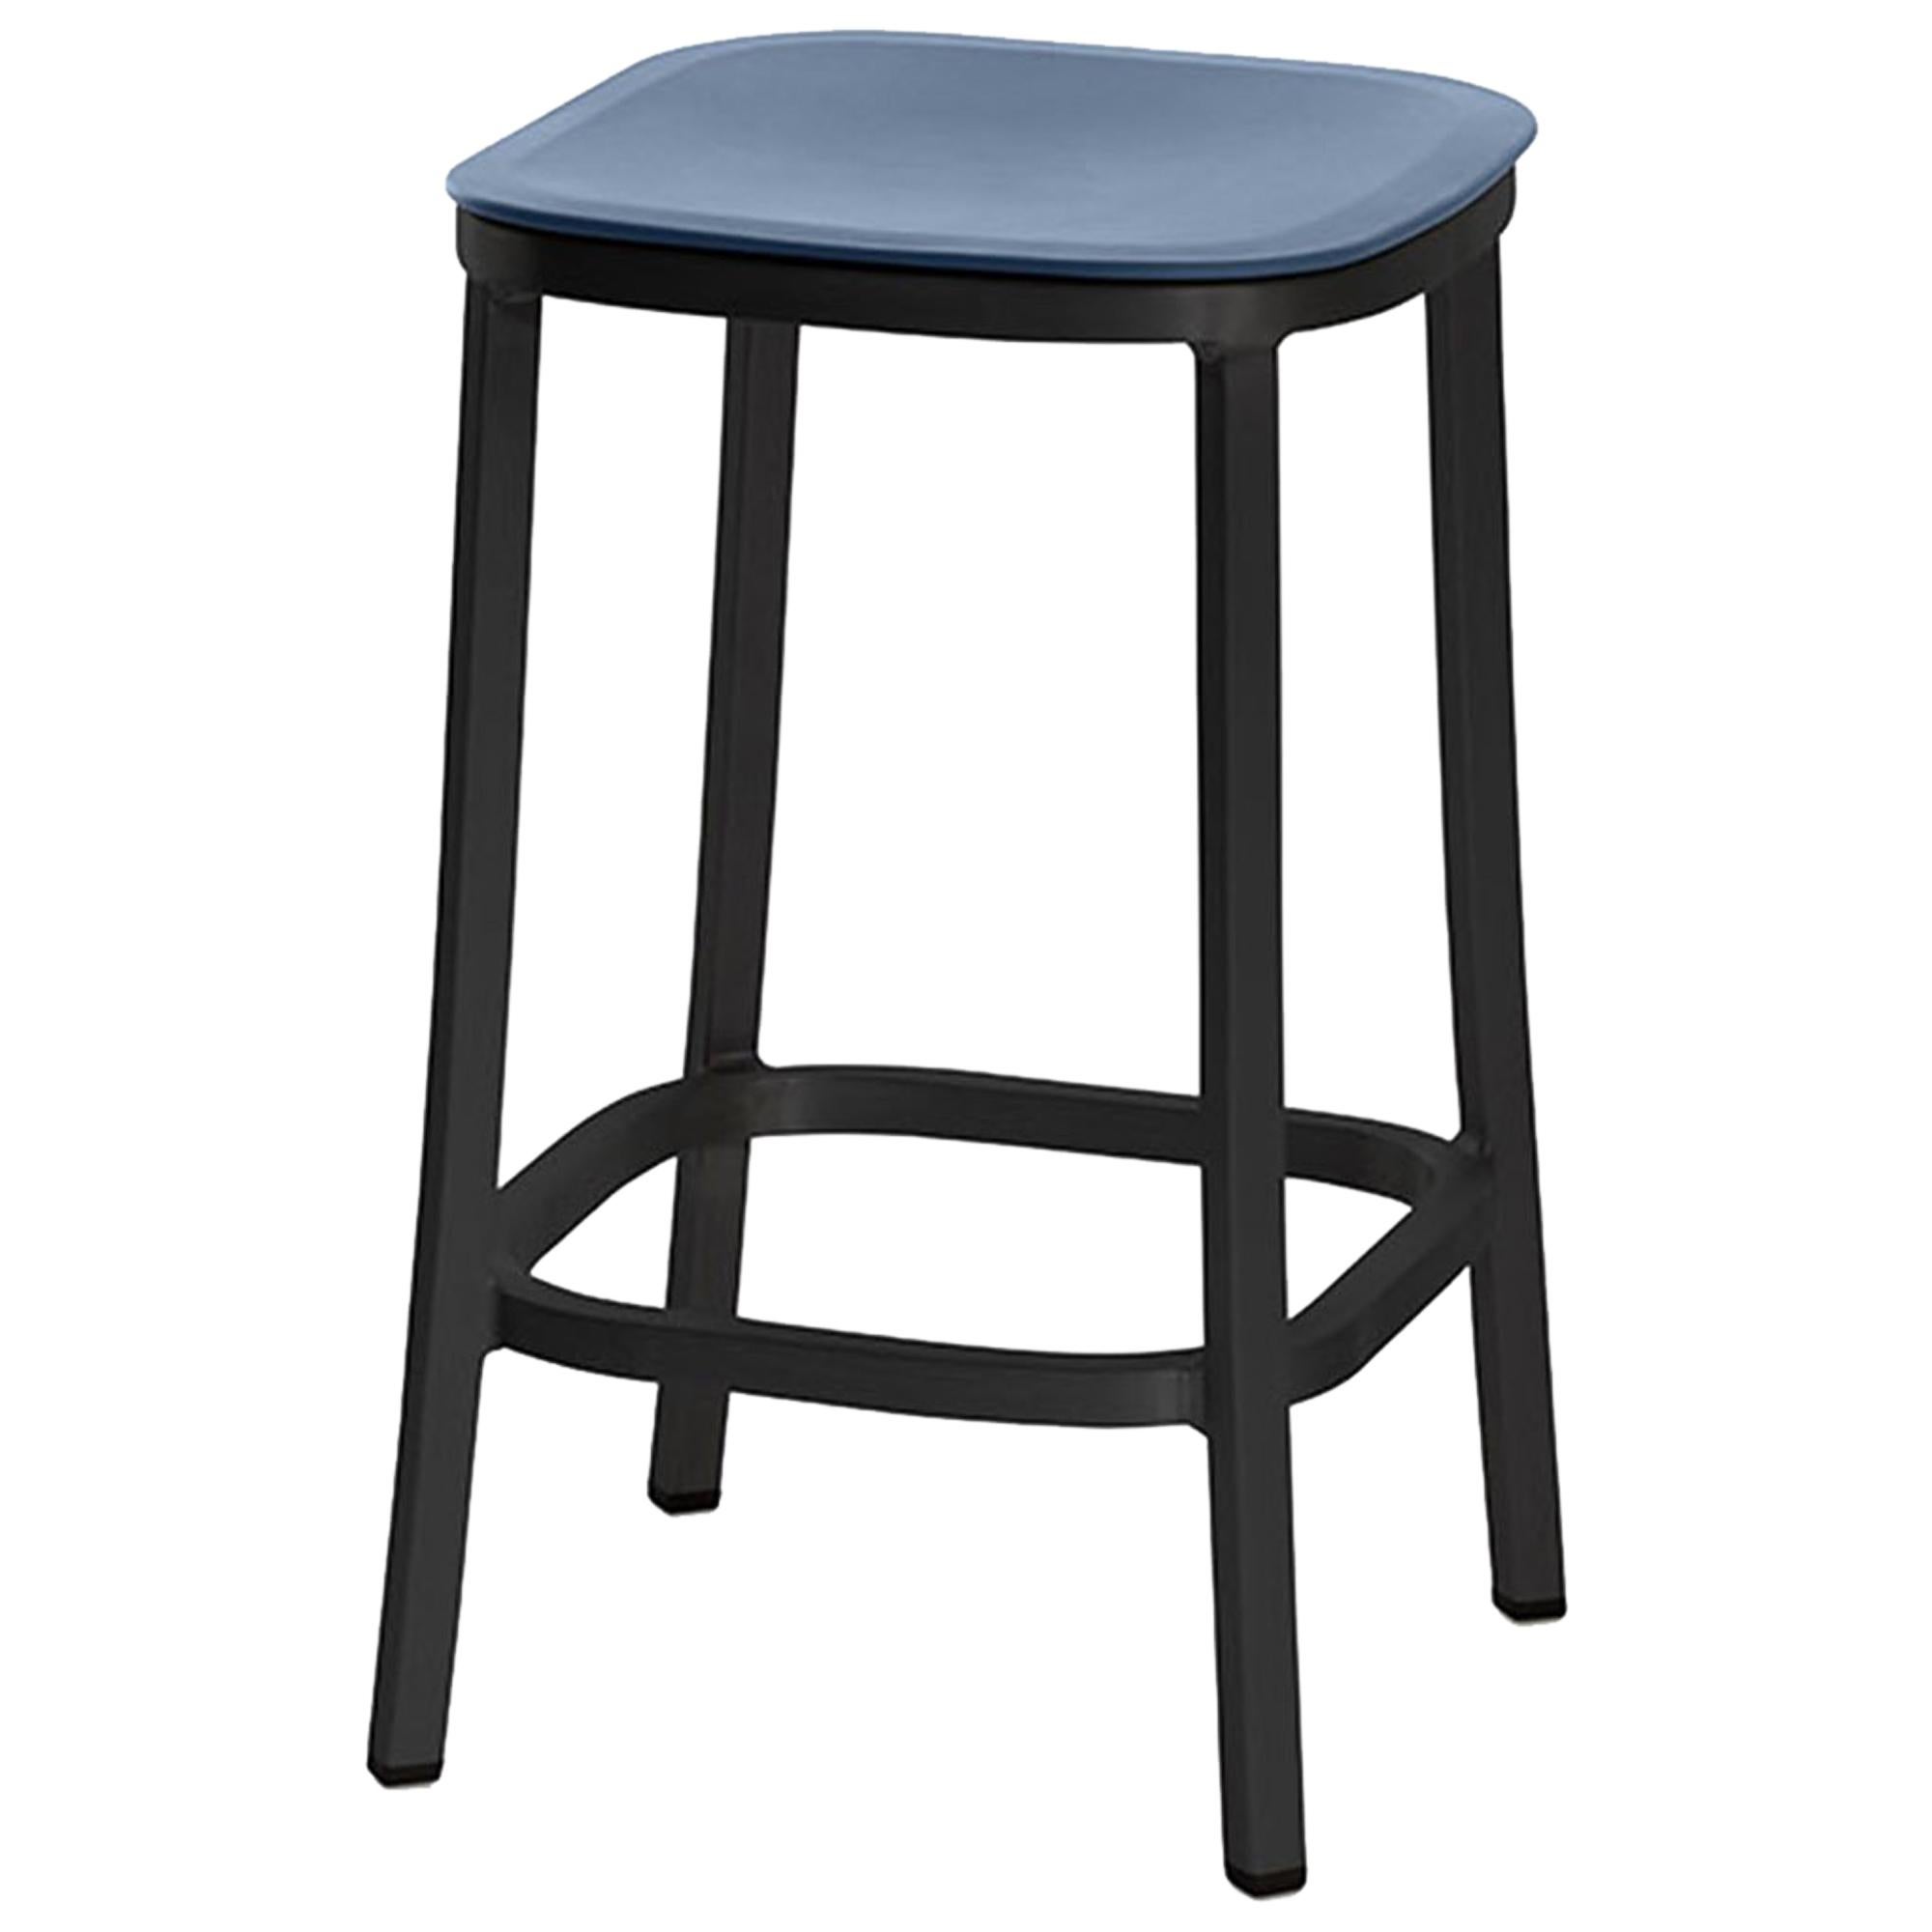 Emeco 1 Inch Counter Stool in Dark Aluminum and Blue by Jasper Morrison